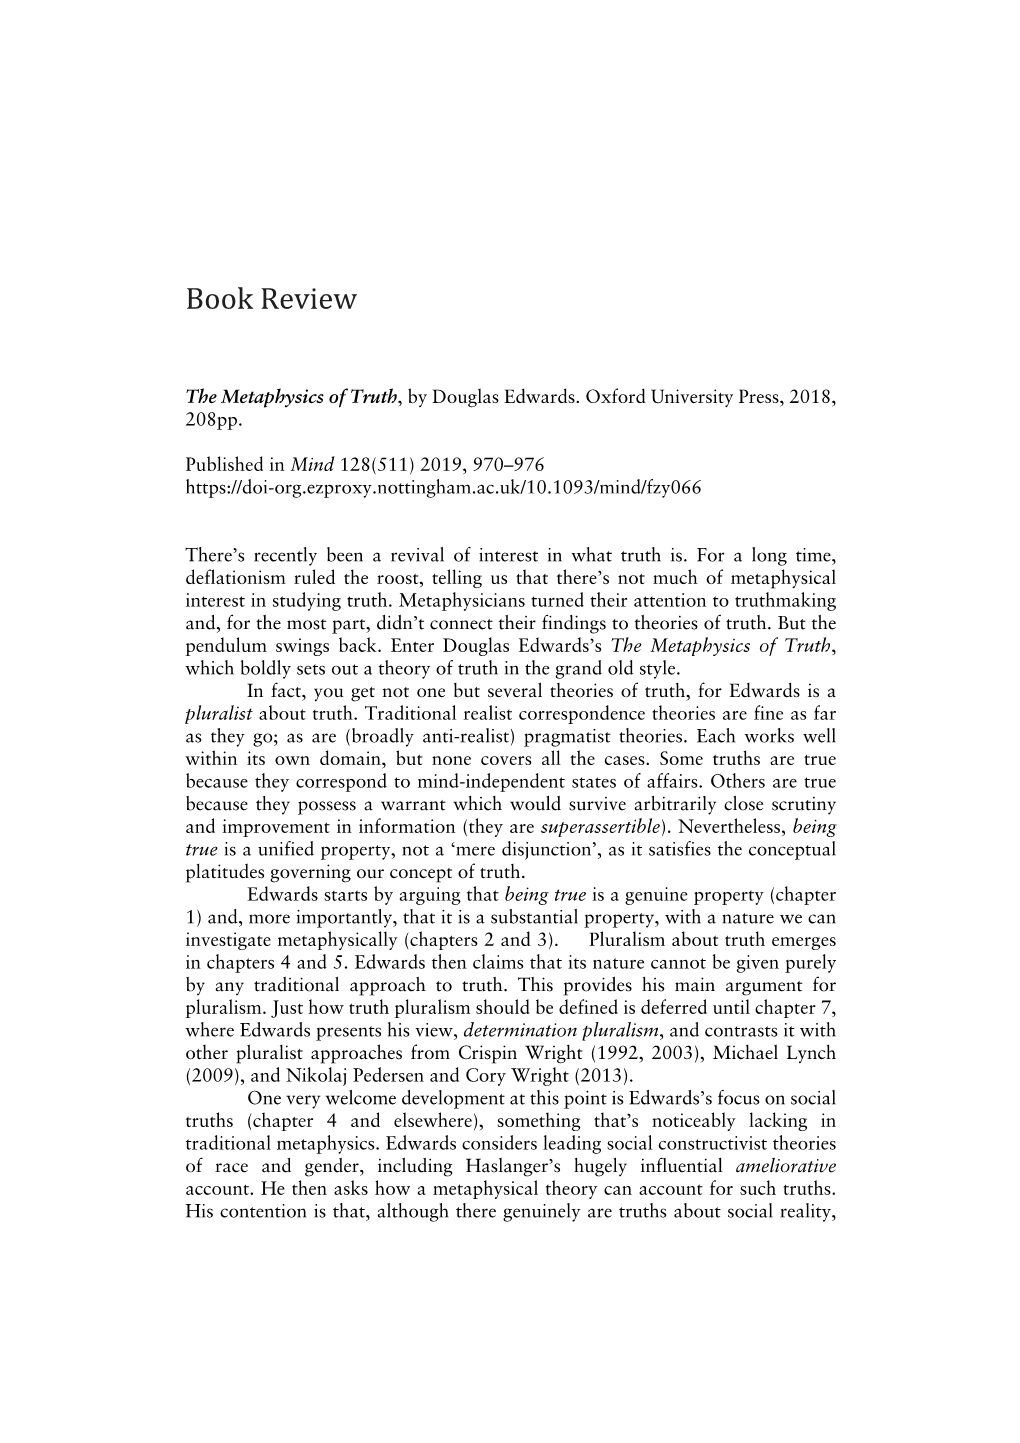 Edwards Metaphysics of Truth Review